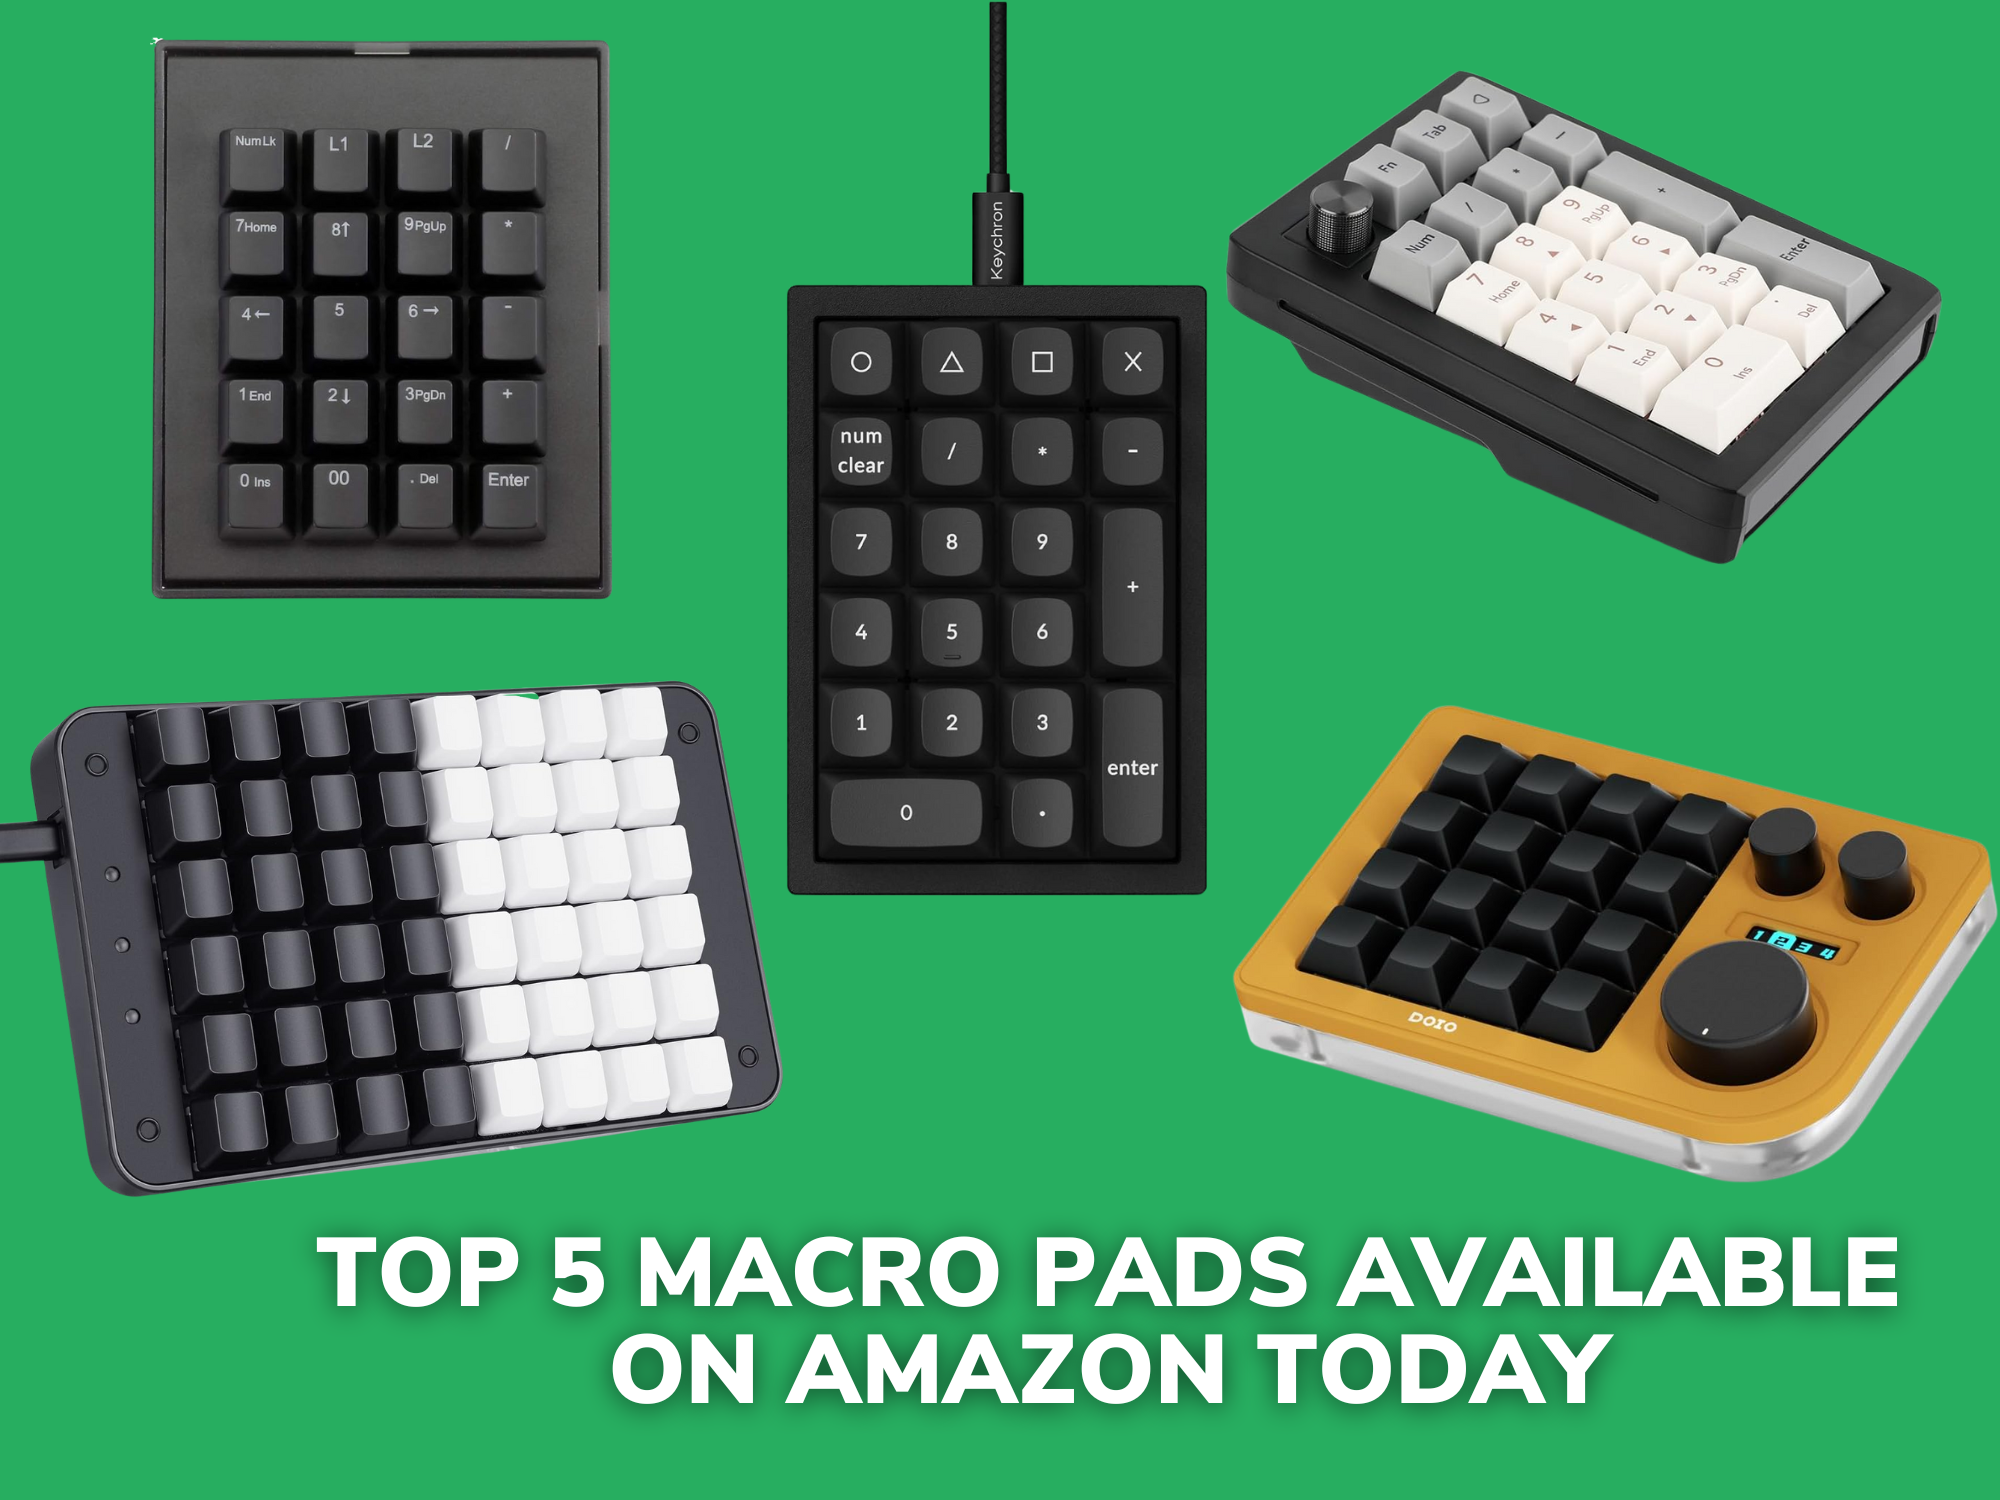 Unleash Productivity: Top 5 Macro Pads Available on Amazon Today